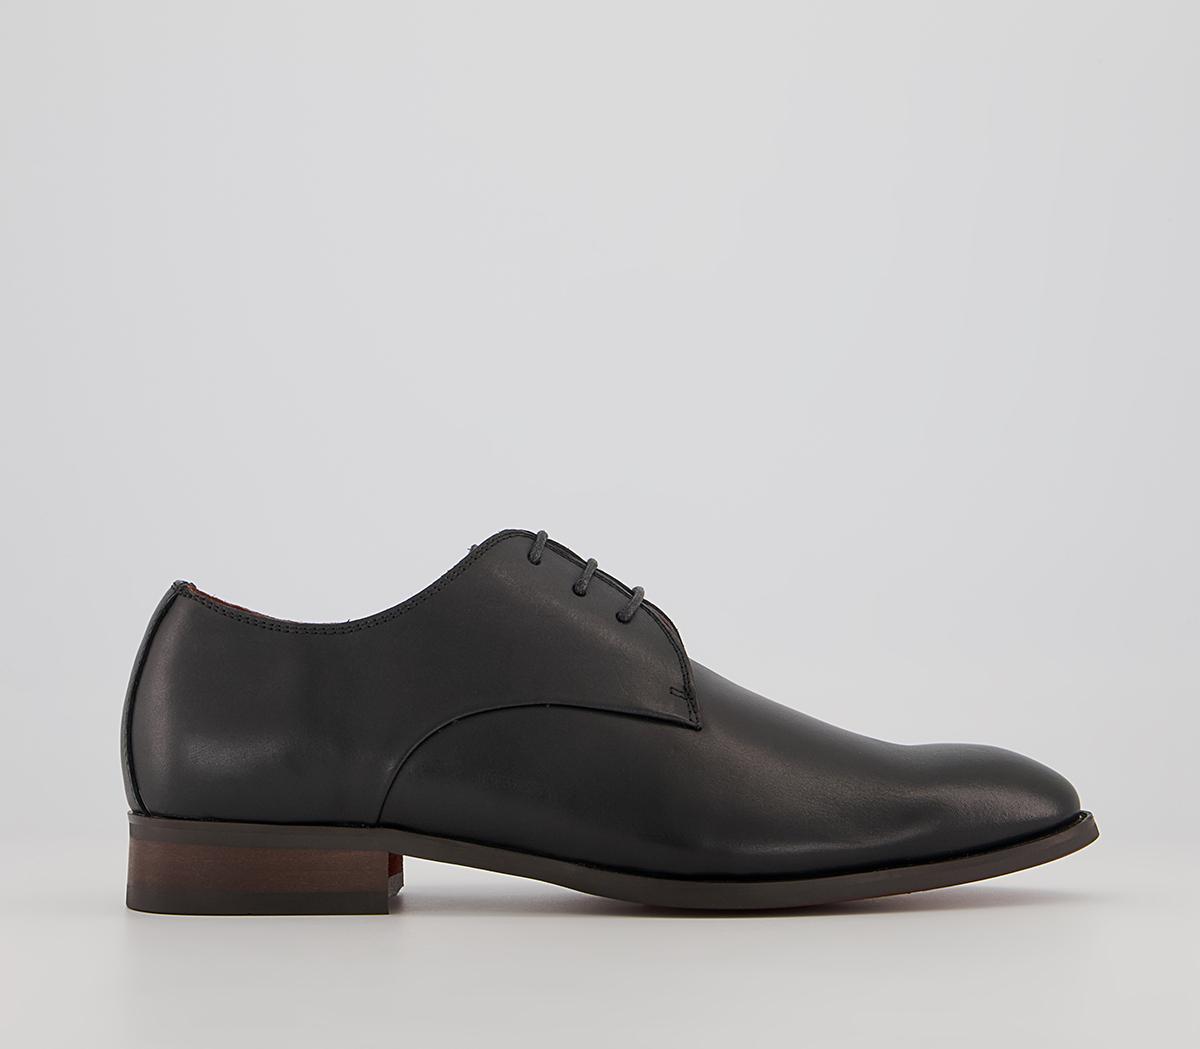 OfficeMiguel Three Eye Derby ShoesBlack Leather